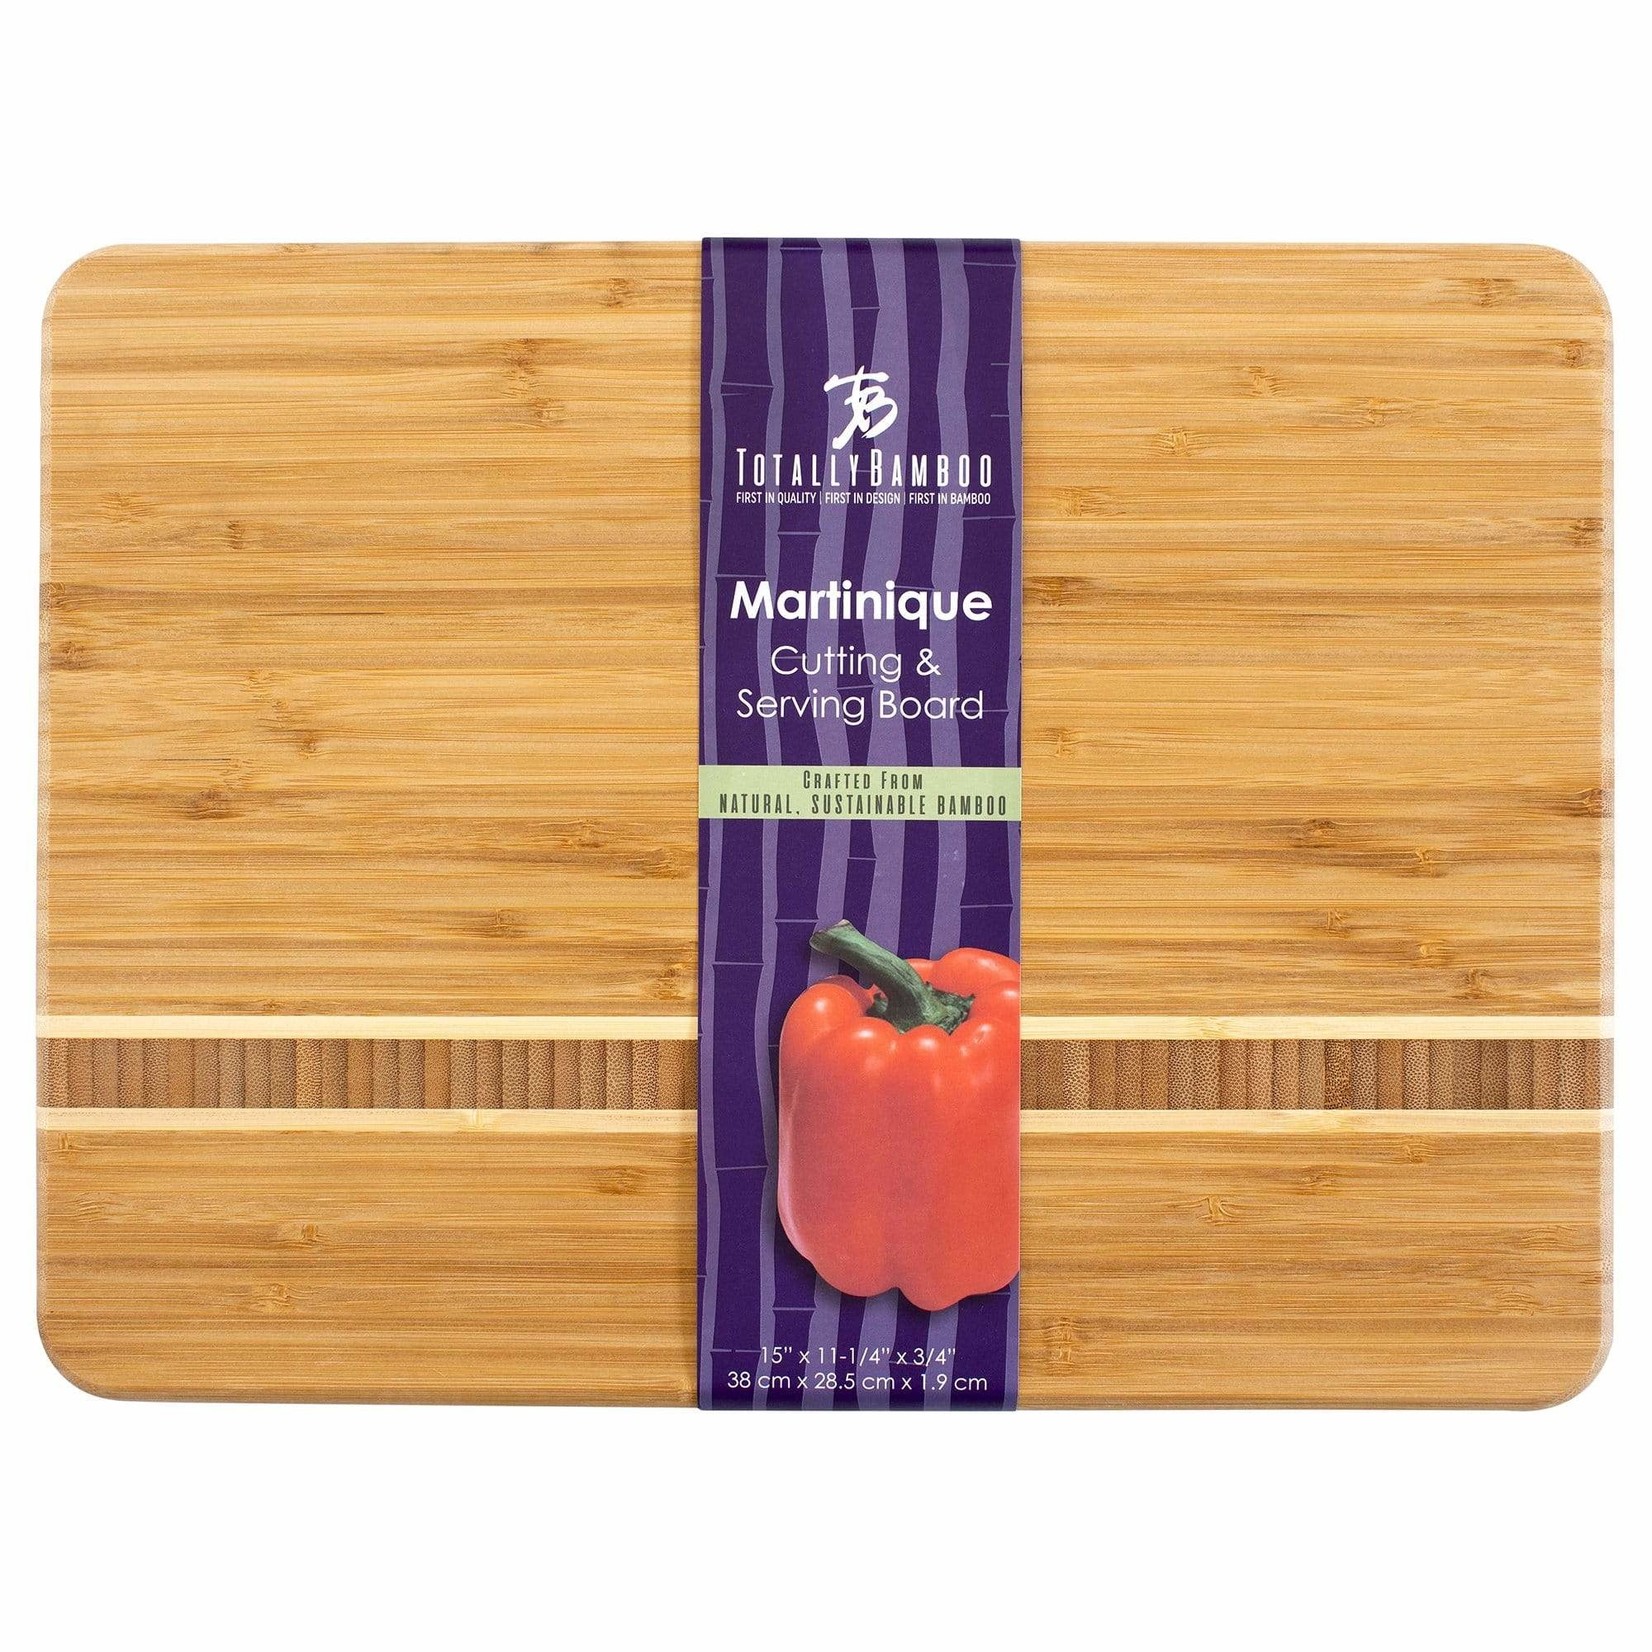 TOTALLY BAMBOO TOTALLY BAMBOO Martinique Cutting Board